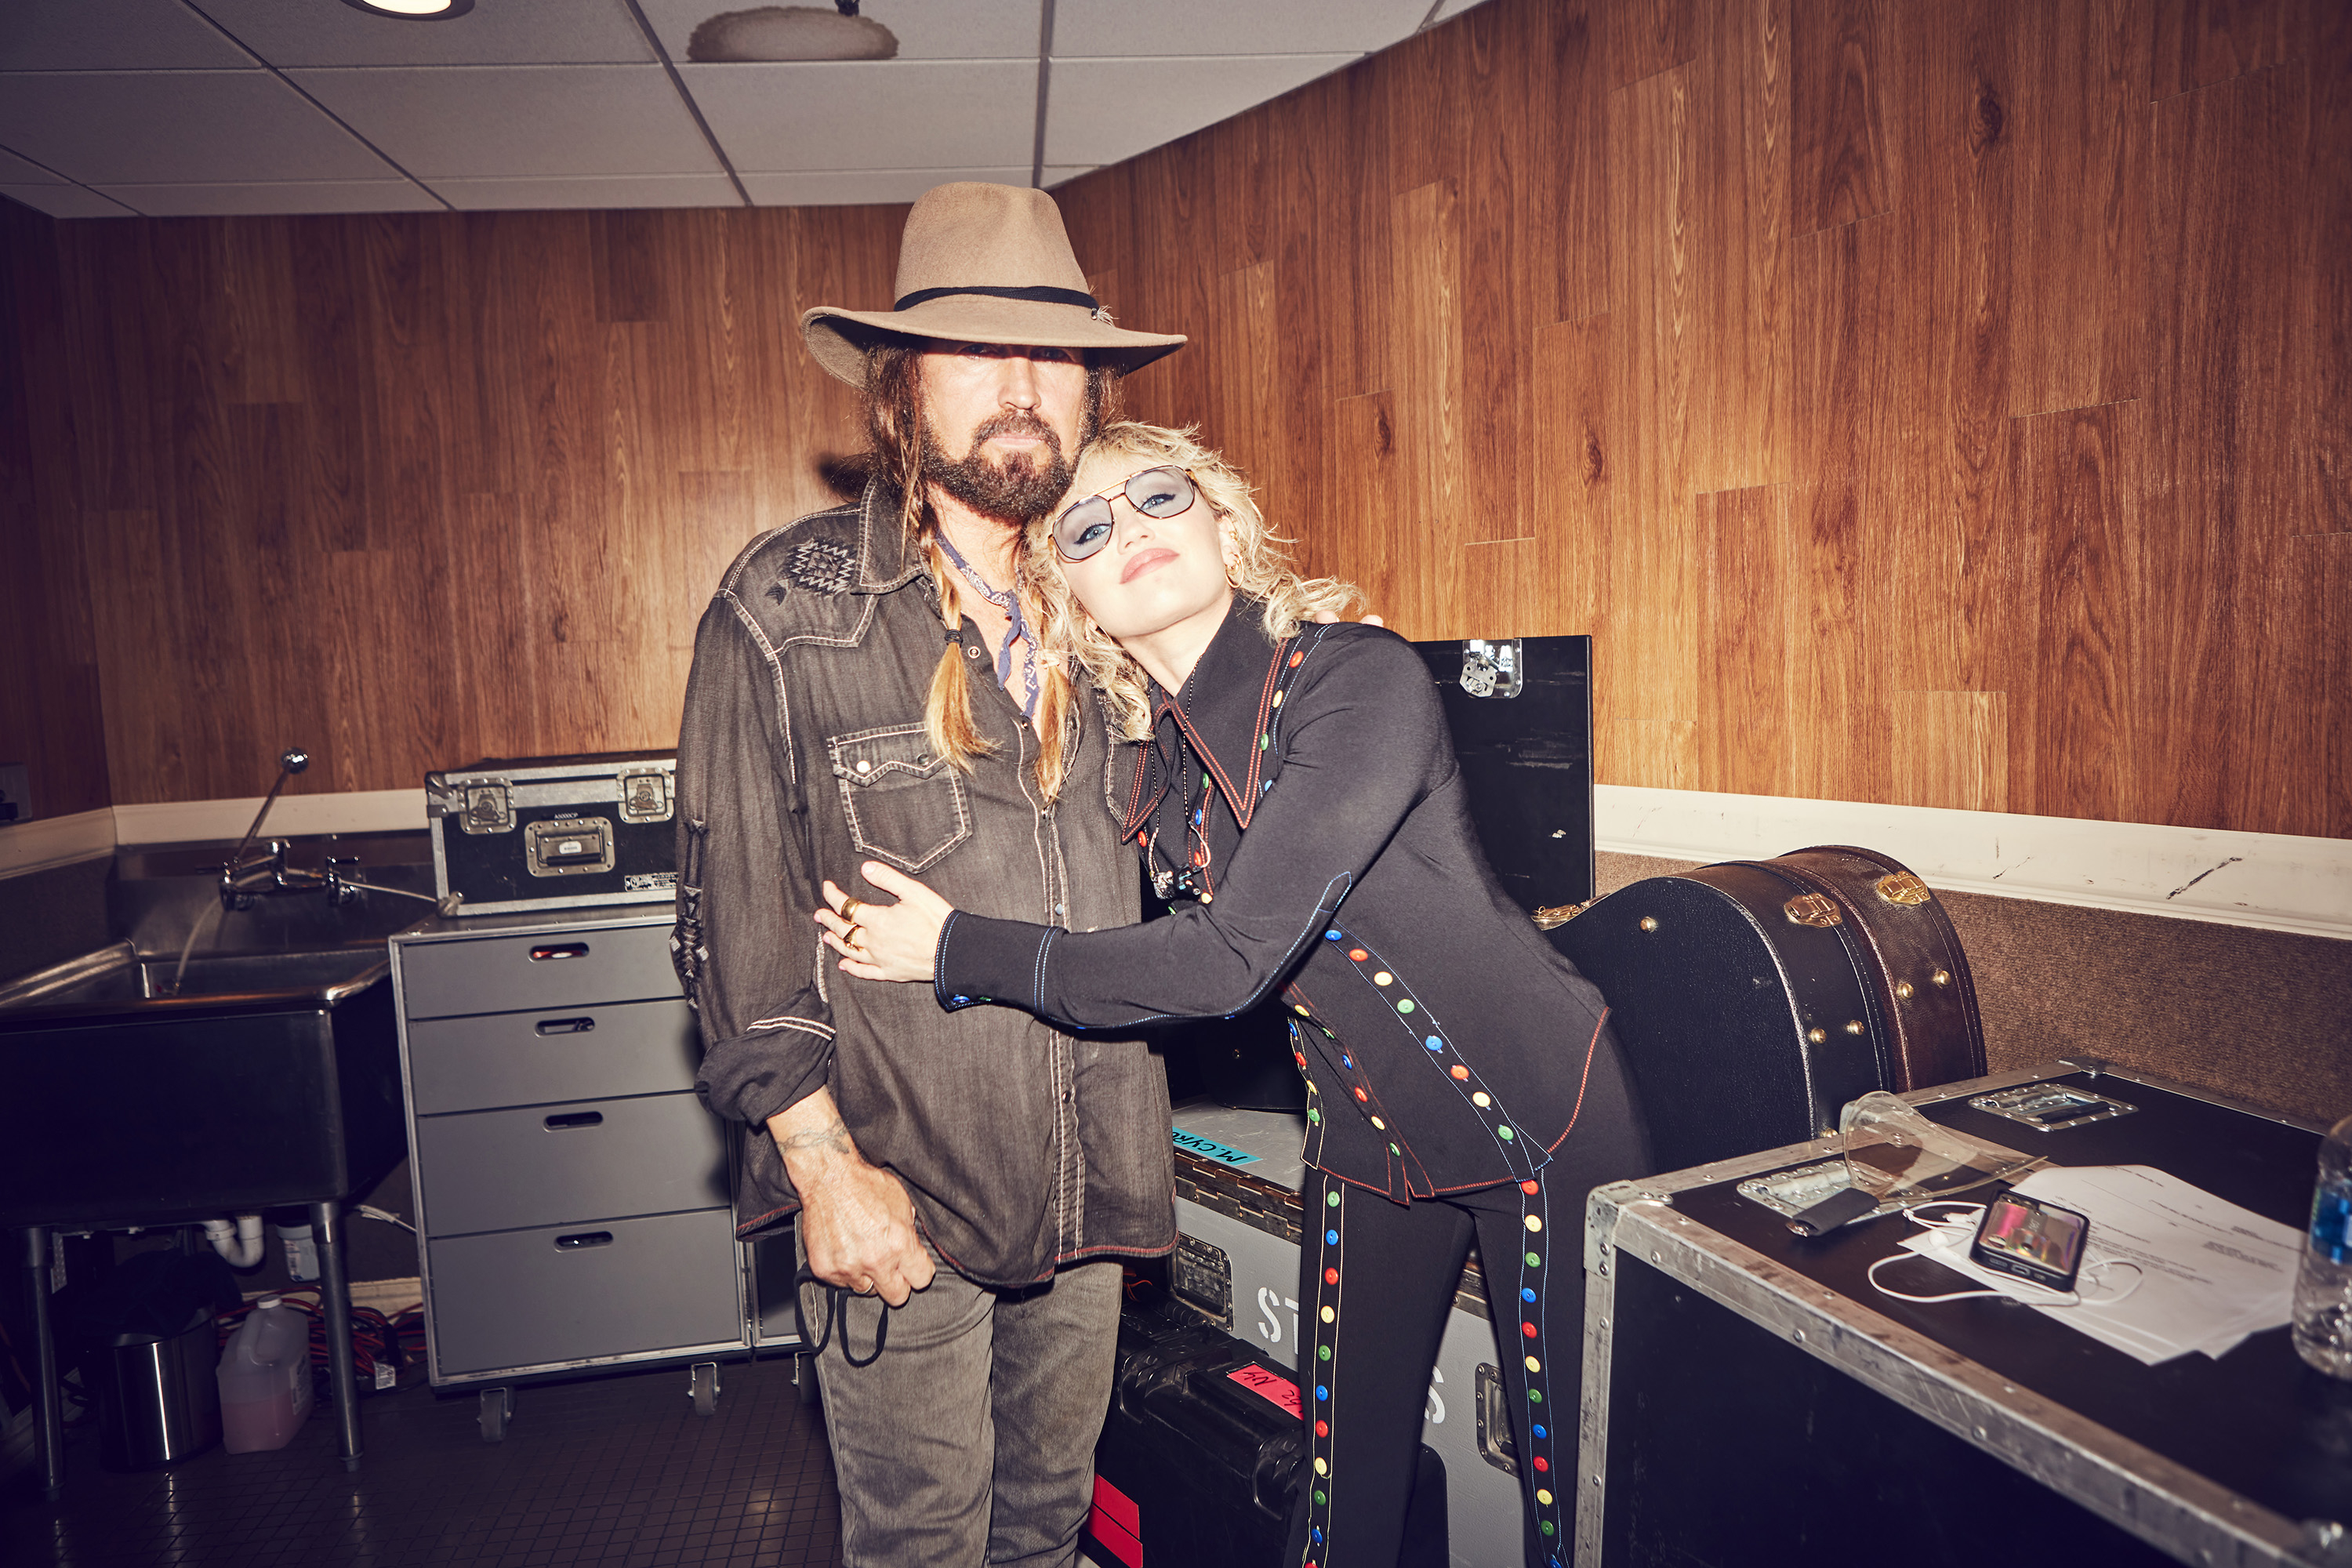 Miley, in a black outfit with ribbon details, hugs Billy Ray, in a hat and denim jacket, backstage